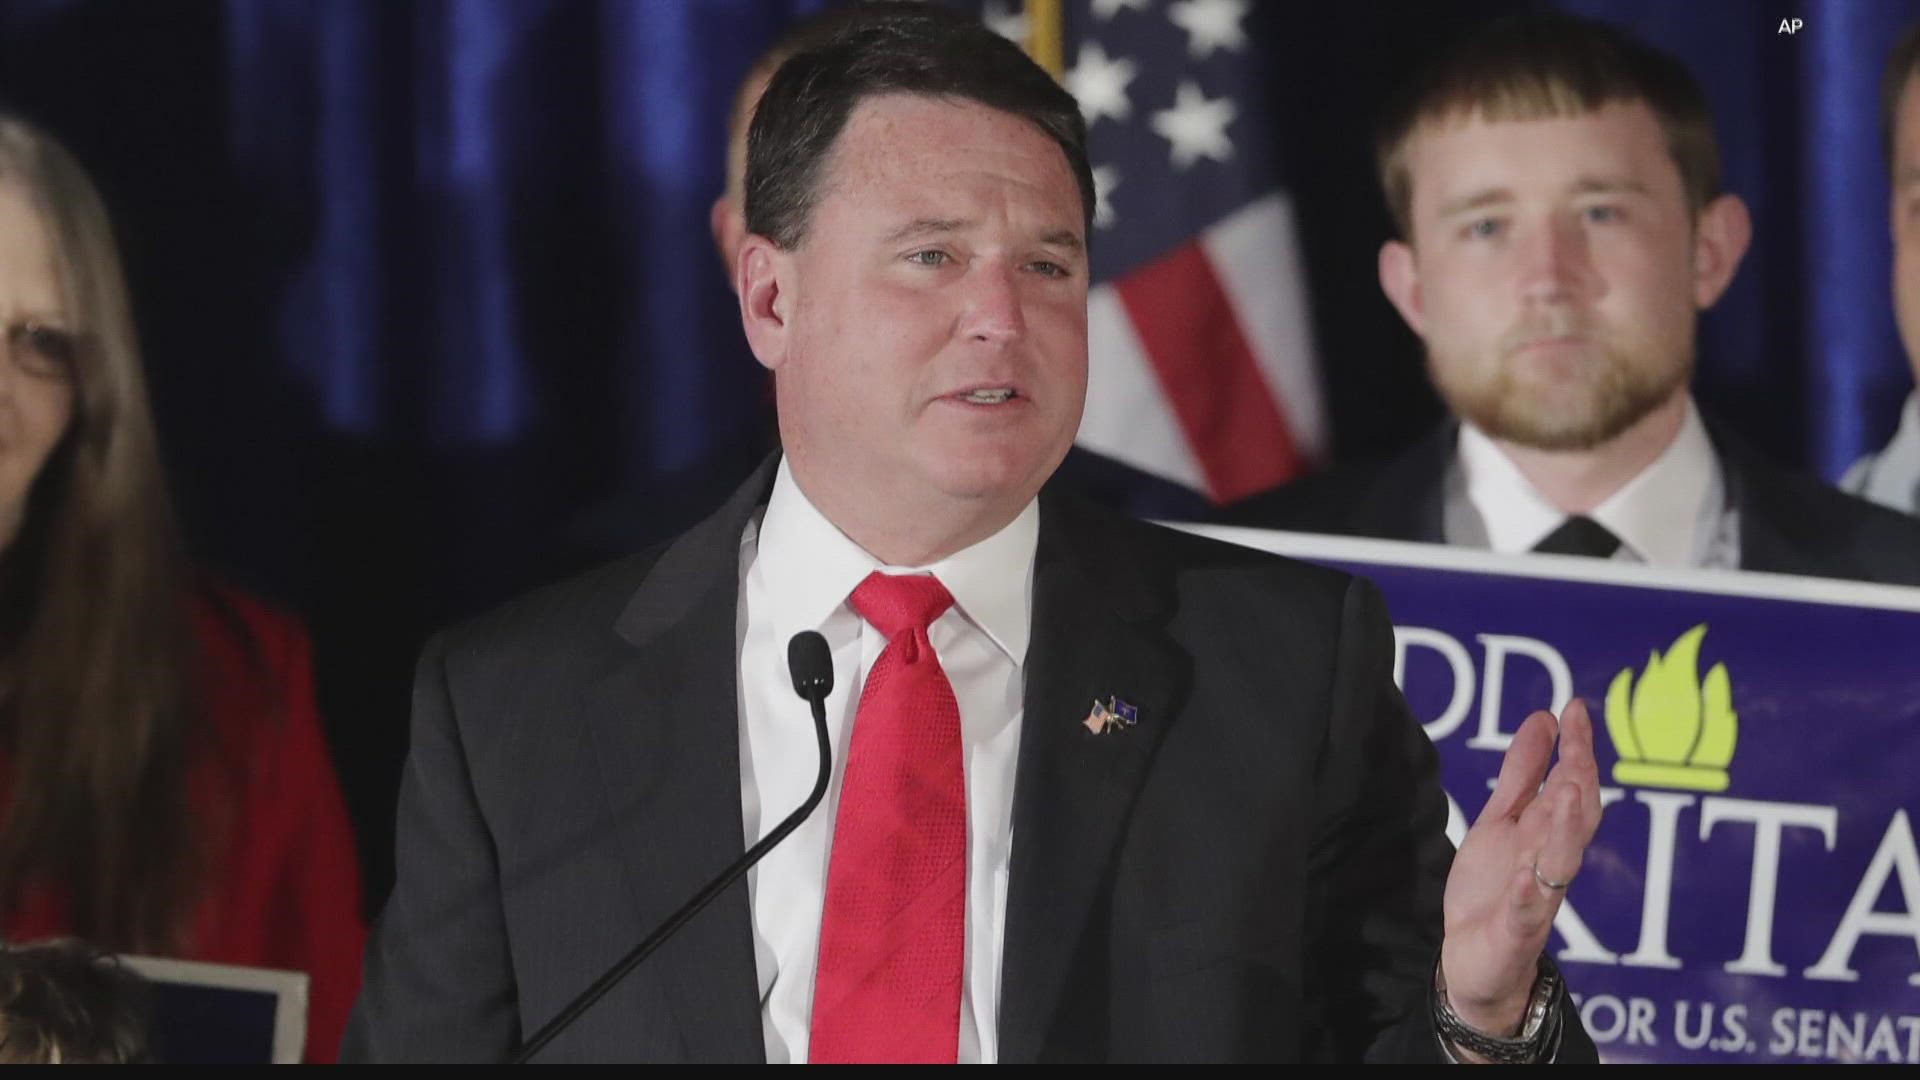 The attorney for Dr. Caitlin Bernard filed a claim for damages against Todd Rokita.